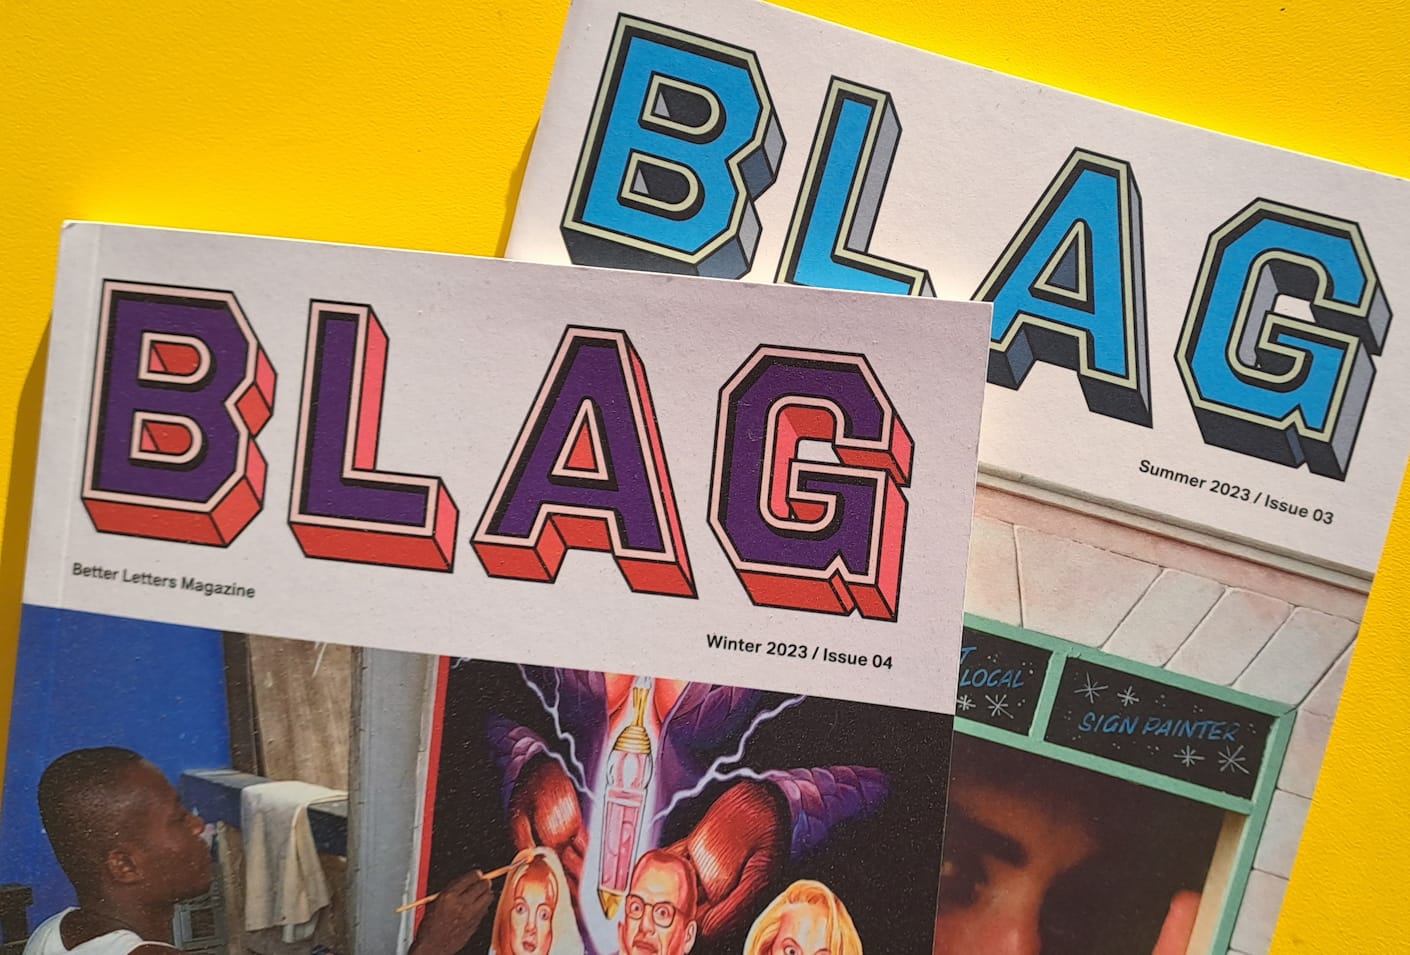 Two issues of a magazine with the masthead BLAG above sign painting-related photography.